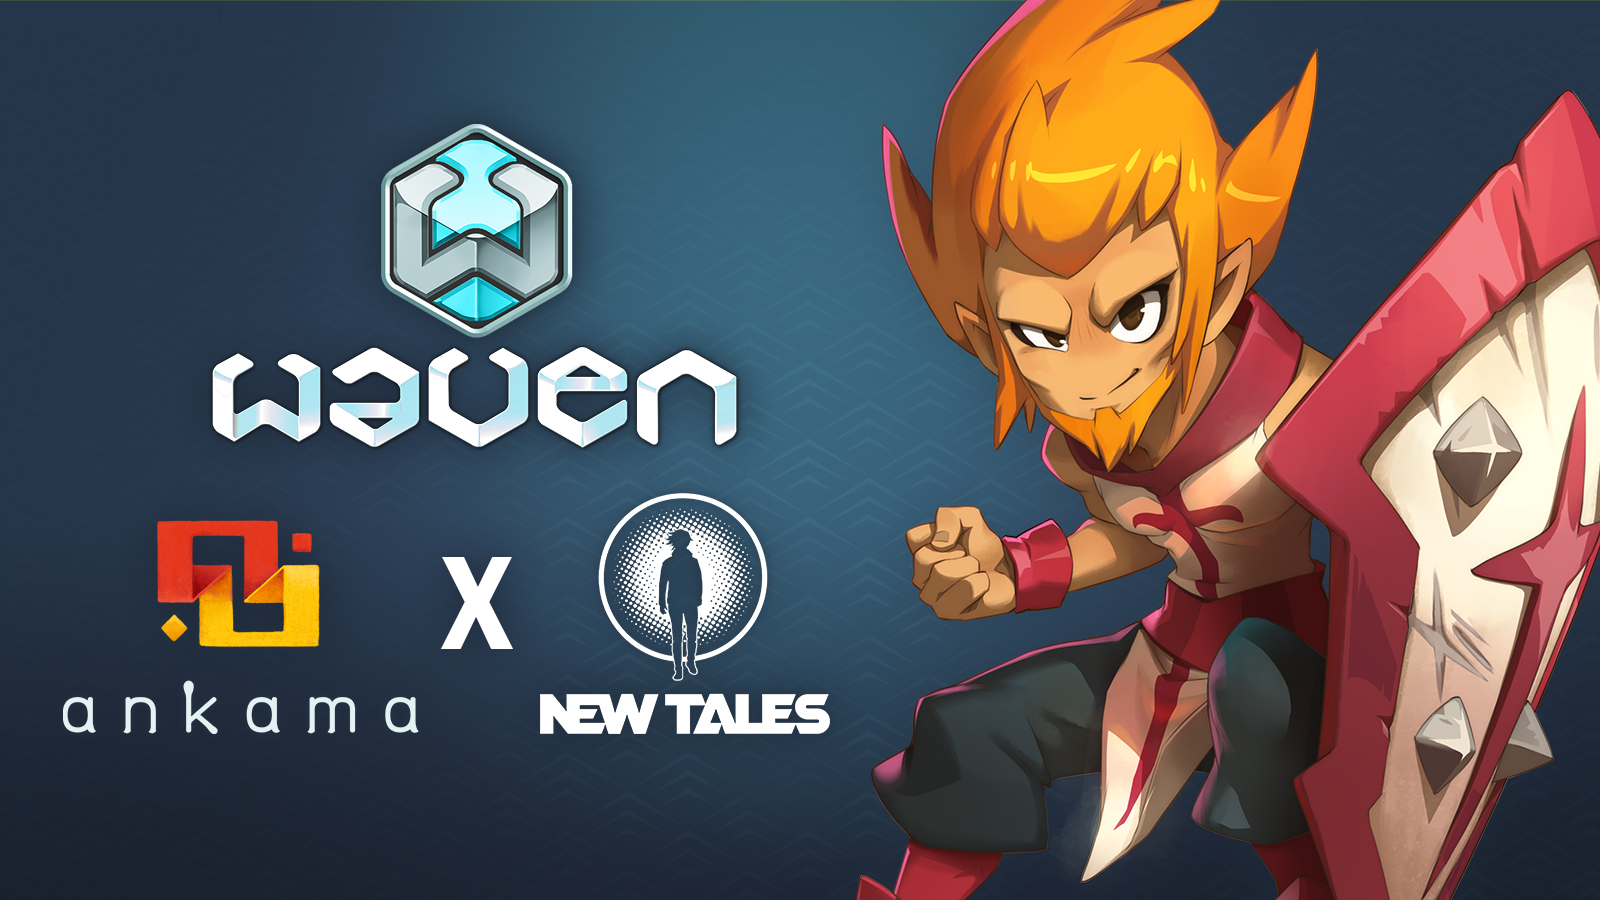 Ankama and New Tales join forces to publish the company’s new free game: Waven